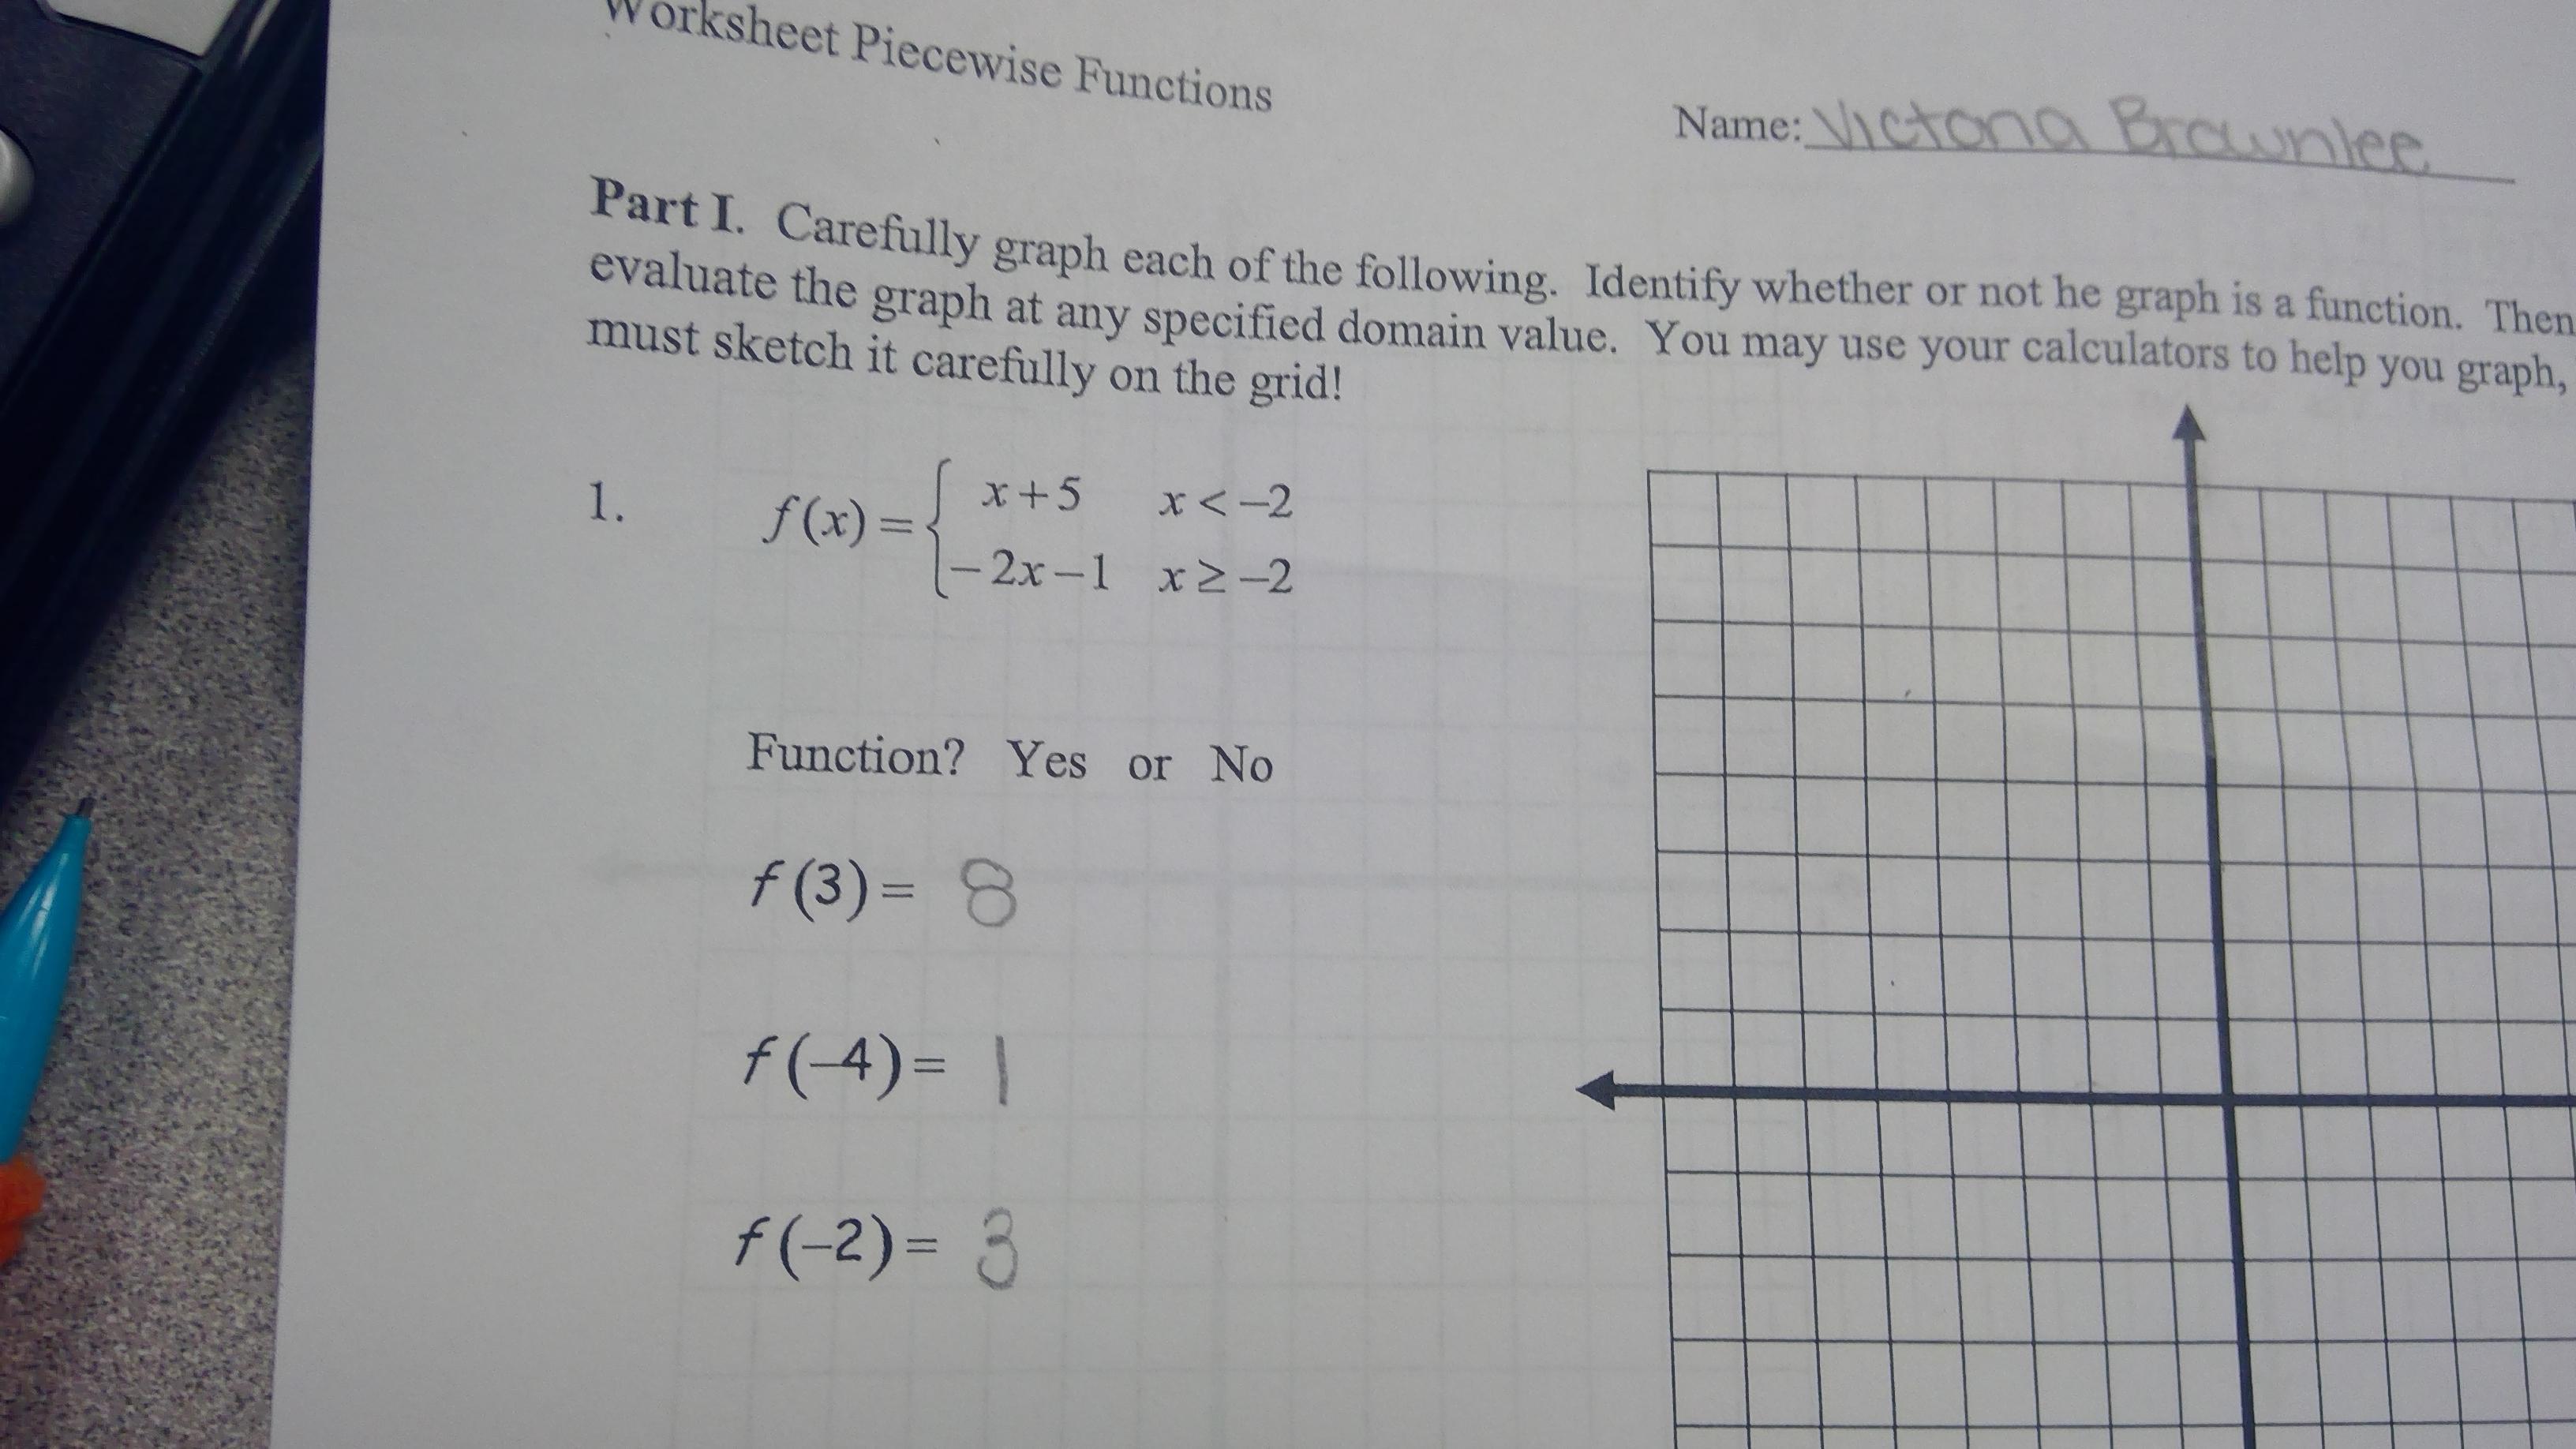 Graph The Function. Identify Whether Or Not The Graph Is A Function